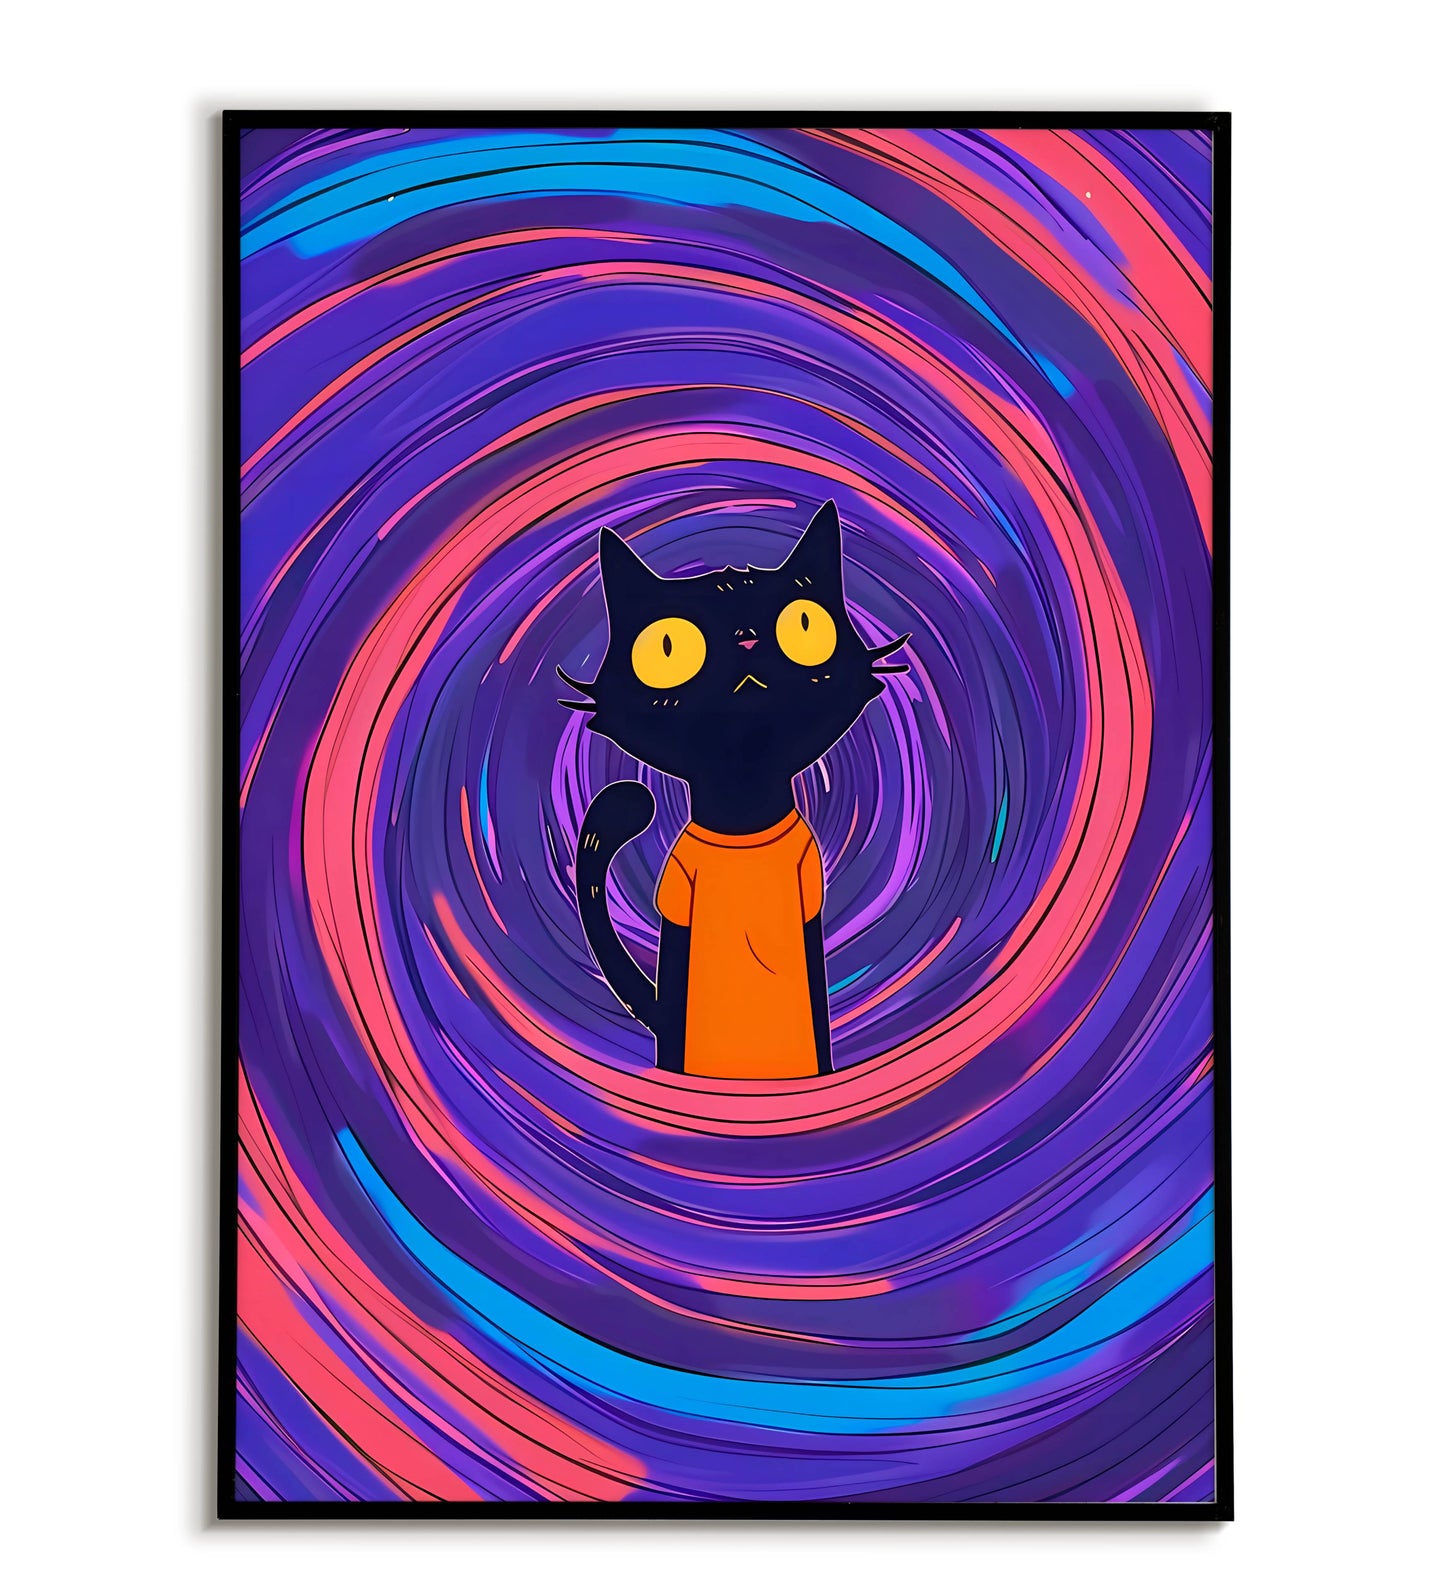 Swirling Cat Portal printable poster. Available for purchase as a physical poster or digital download.